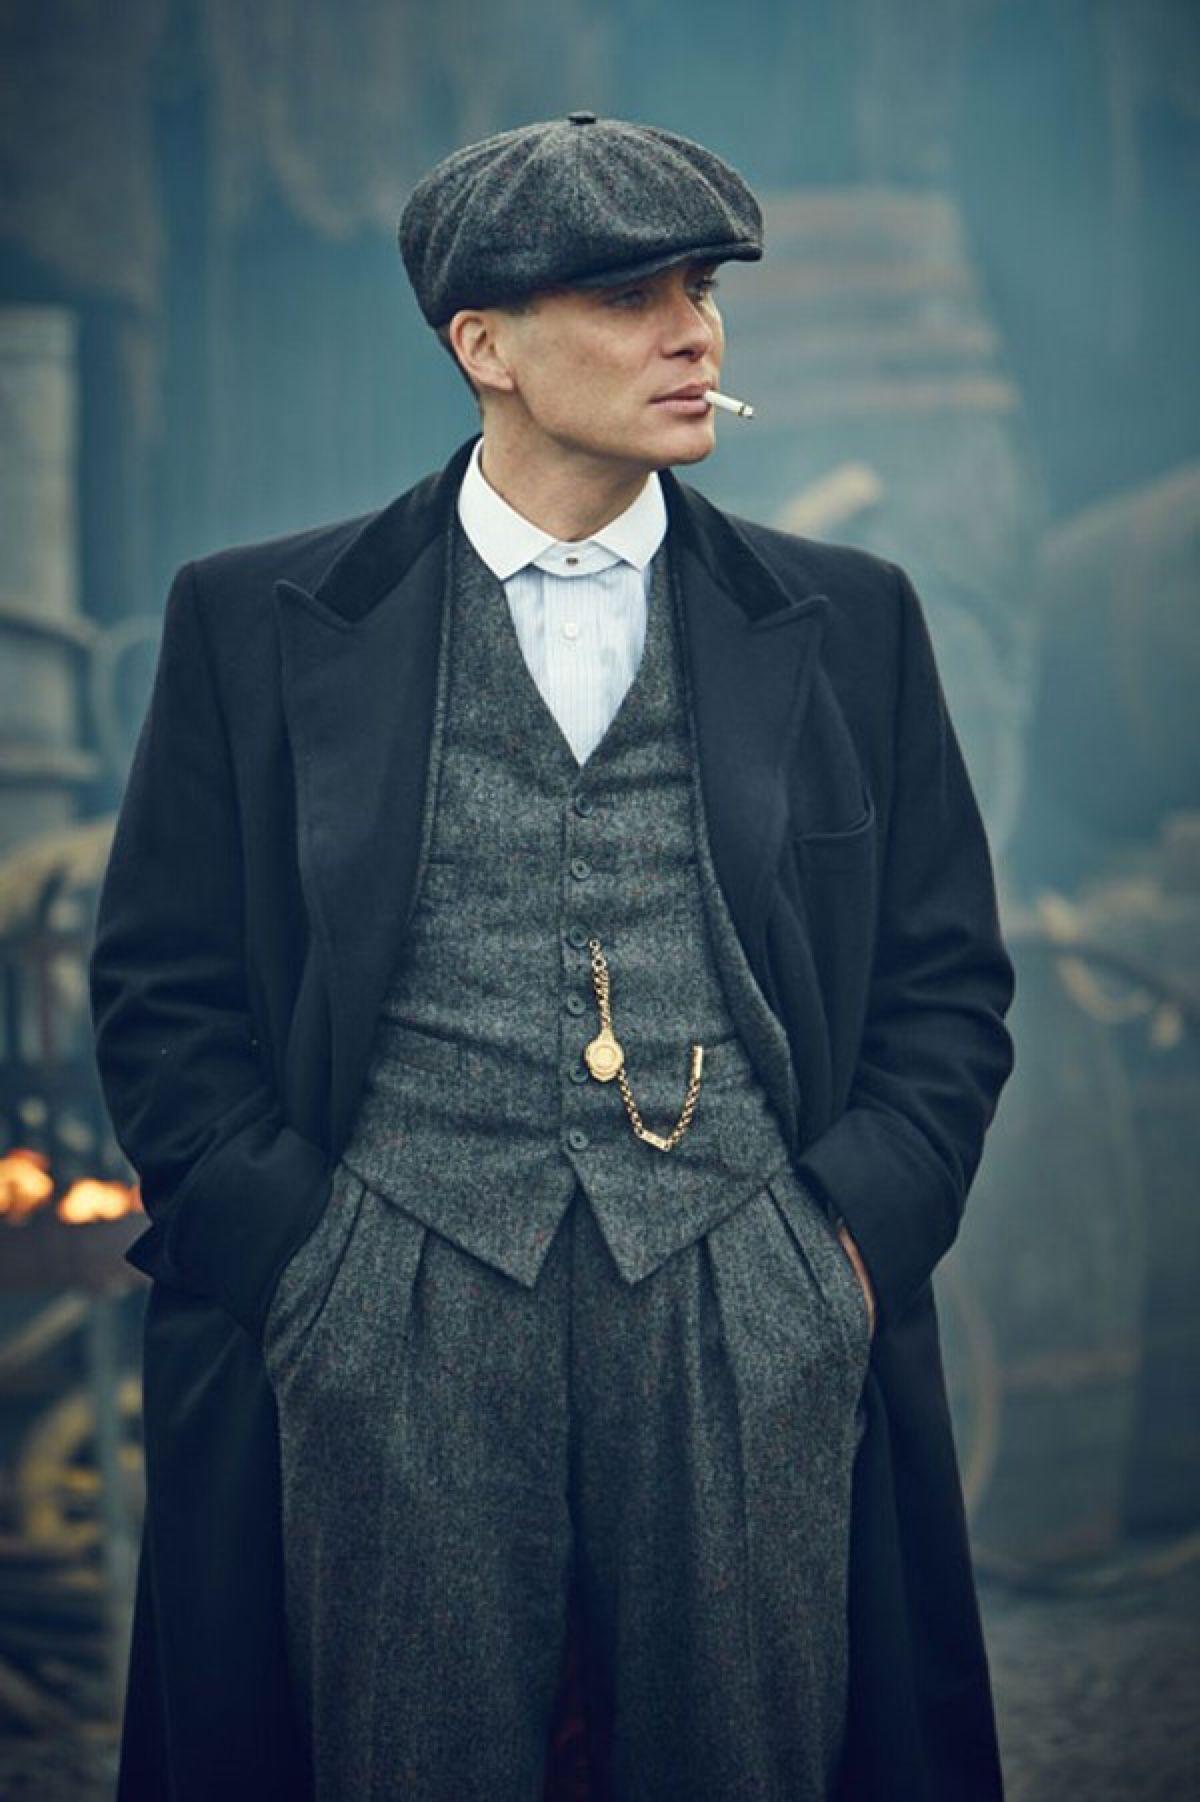 1200 x 1802 · jpeg - Thomas Shelby Wallpapers - Wallpaper Cave